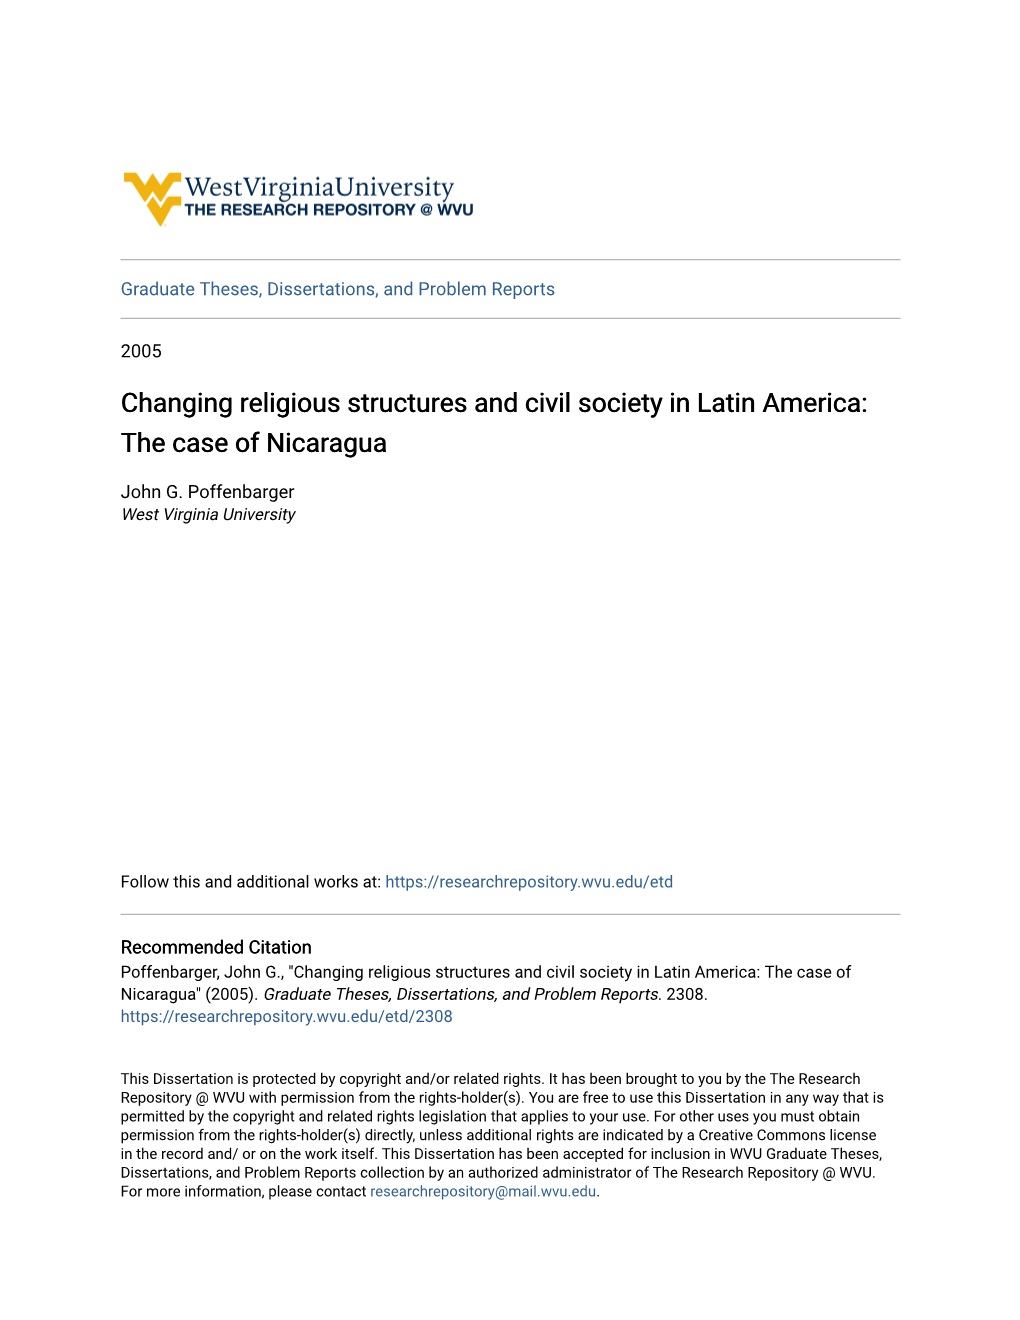 Changing Religious Structures and Civil Society in Latin America: the Case of Nicaragua